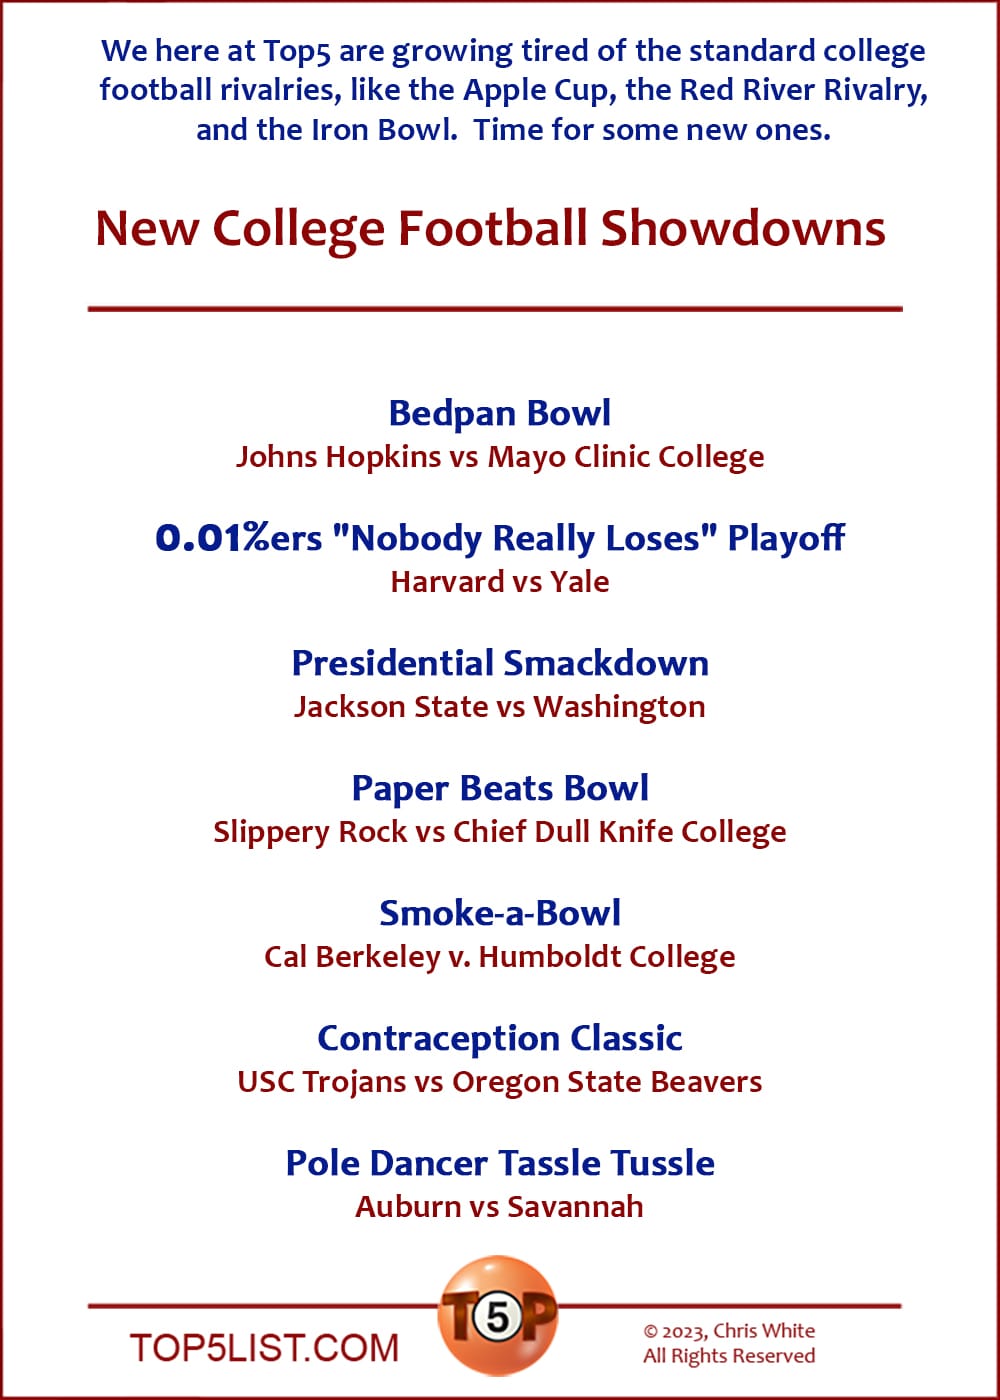 NOTE: We here at Top5 are growing tired of the standard college football rivalries, like the Apple Cup, the Red River Rivalry, and the Iron Bowl. Time for some new ones.  New College Football Showdowns  |  Bedpan Bowl: Johns Hopkins vs Mayo Clinic College  0.01%ers "No Real Losers" Playoff: Harvard vs Yale  Presidential Smackdown: Jackson State vs Washington  Paper Beats Bowl: Slippery Rock vs Chief Dull Knife College  Smoke-a-Bowl: Cal Berkeley v. Humboldt College  Contraception Classic: USC Trojans vs Oregon State Beavers  Pole Dancer Tassle Tussle: Auburn vs Savannah